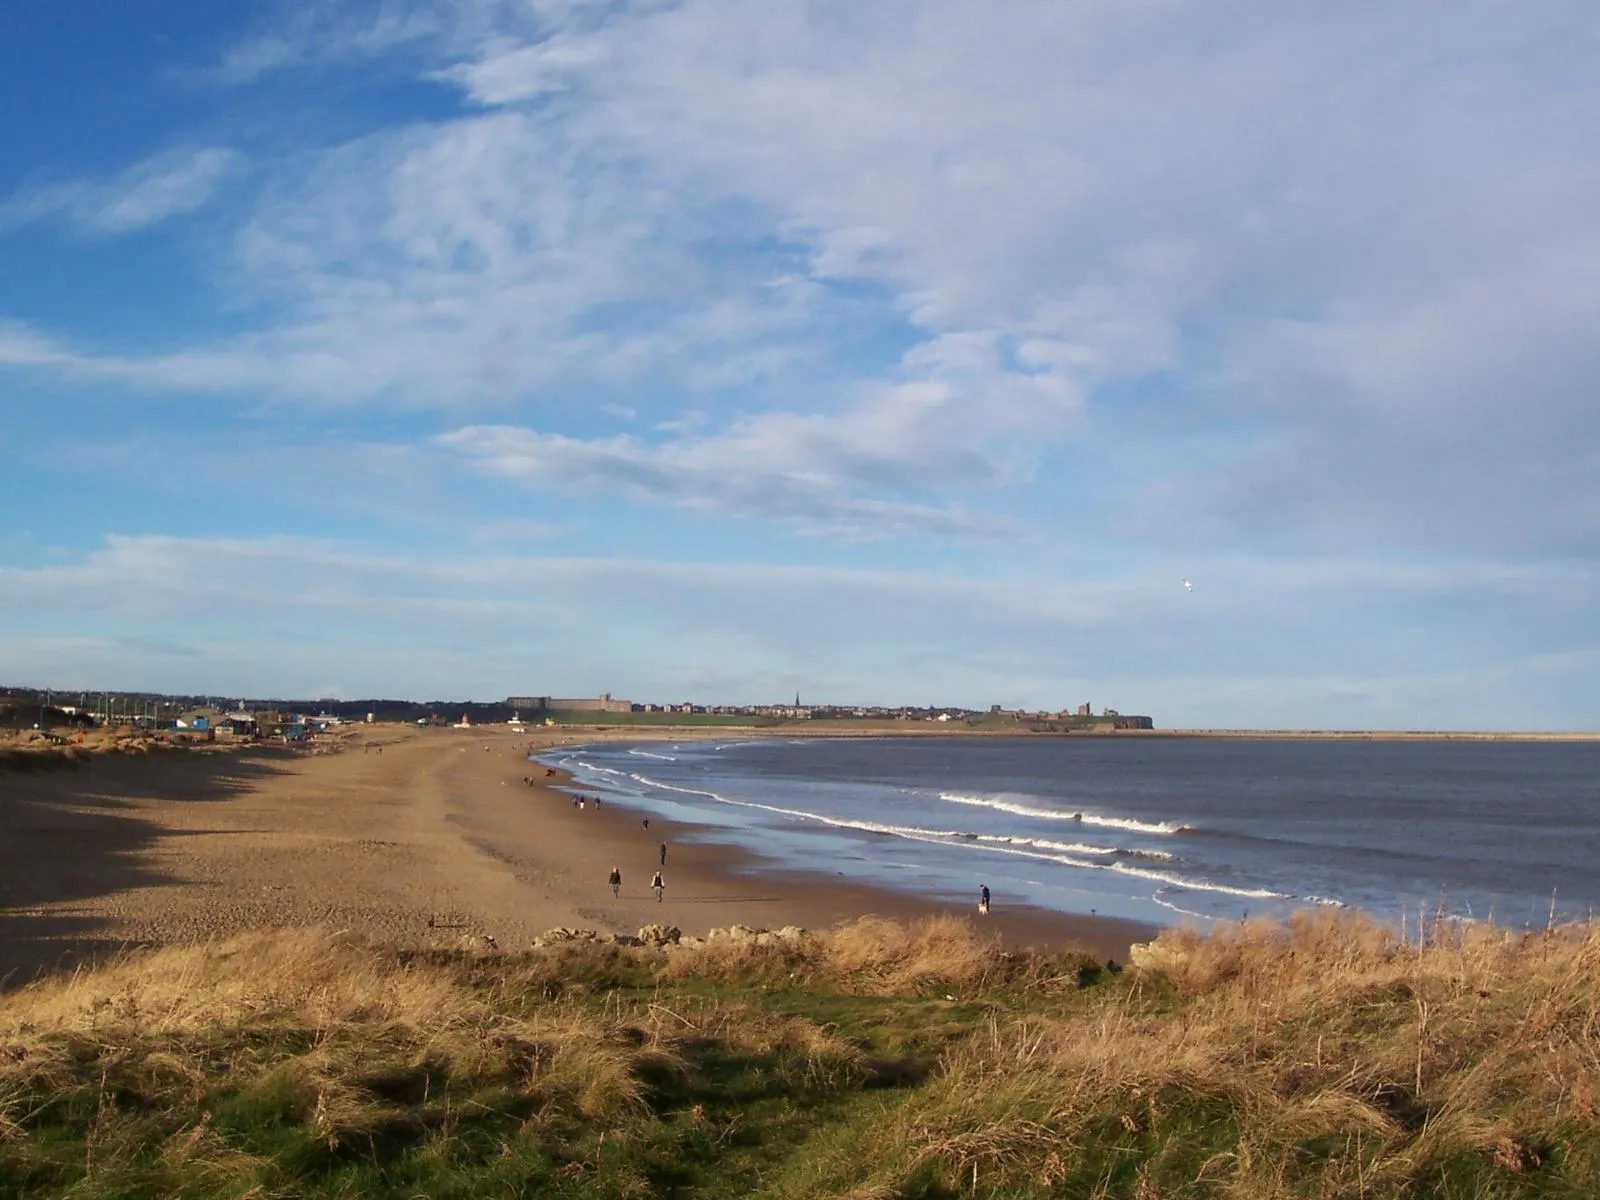 Photo showing: Sandhaven Beach, South Shields, South Tyneside. Tynemouth Priory can be seen in the distance.
This image was taken on 26/12/2004 by Michael Smith (http://mikedavidsmith.com) on a Kodak CX7330 digital camera.